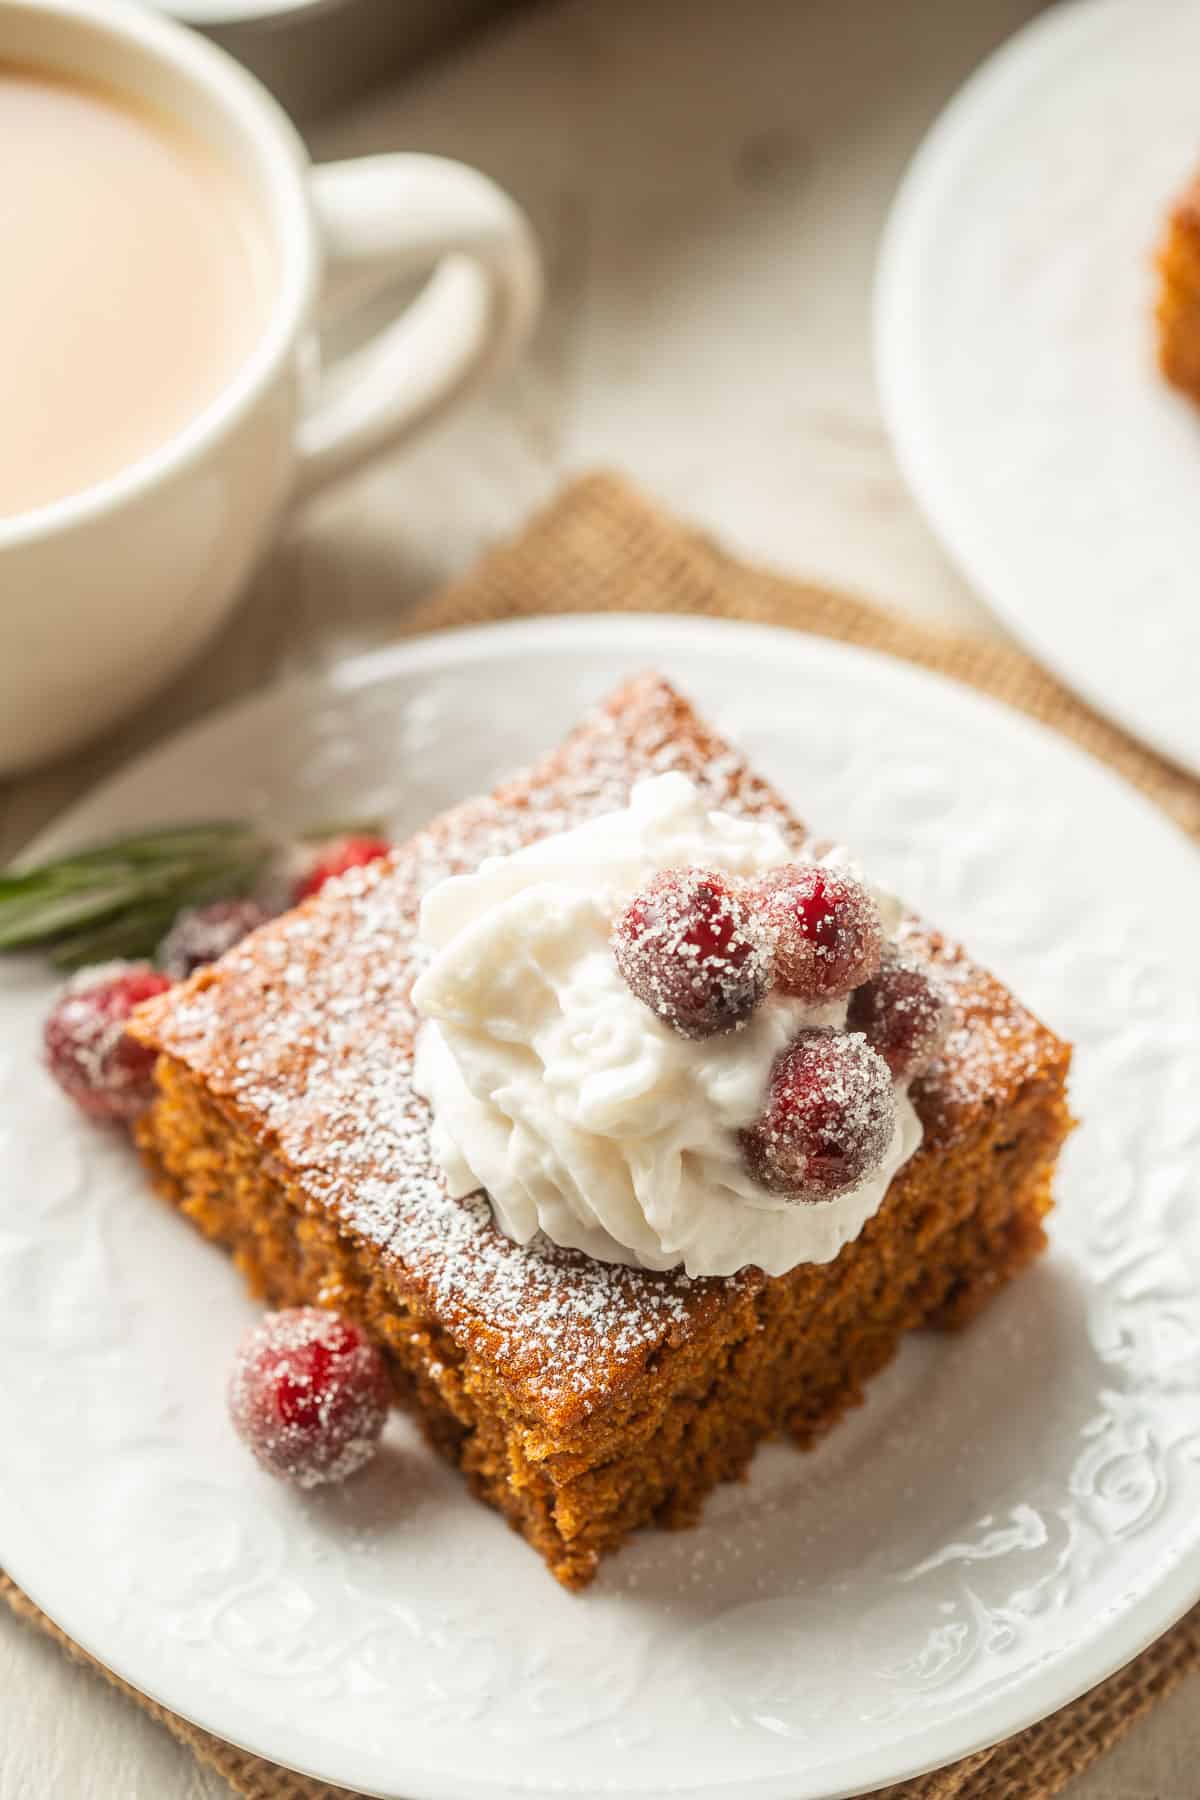 Slice of Vegan Gingerbread Cake on a dish with whipped cream, rosemary and cranberries, with coffee cup in the background.